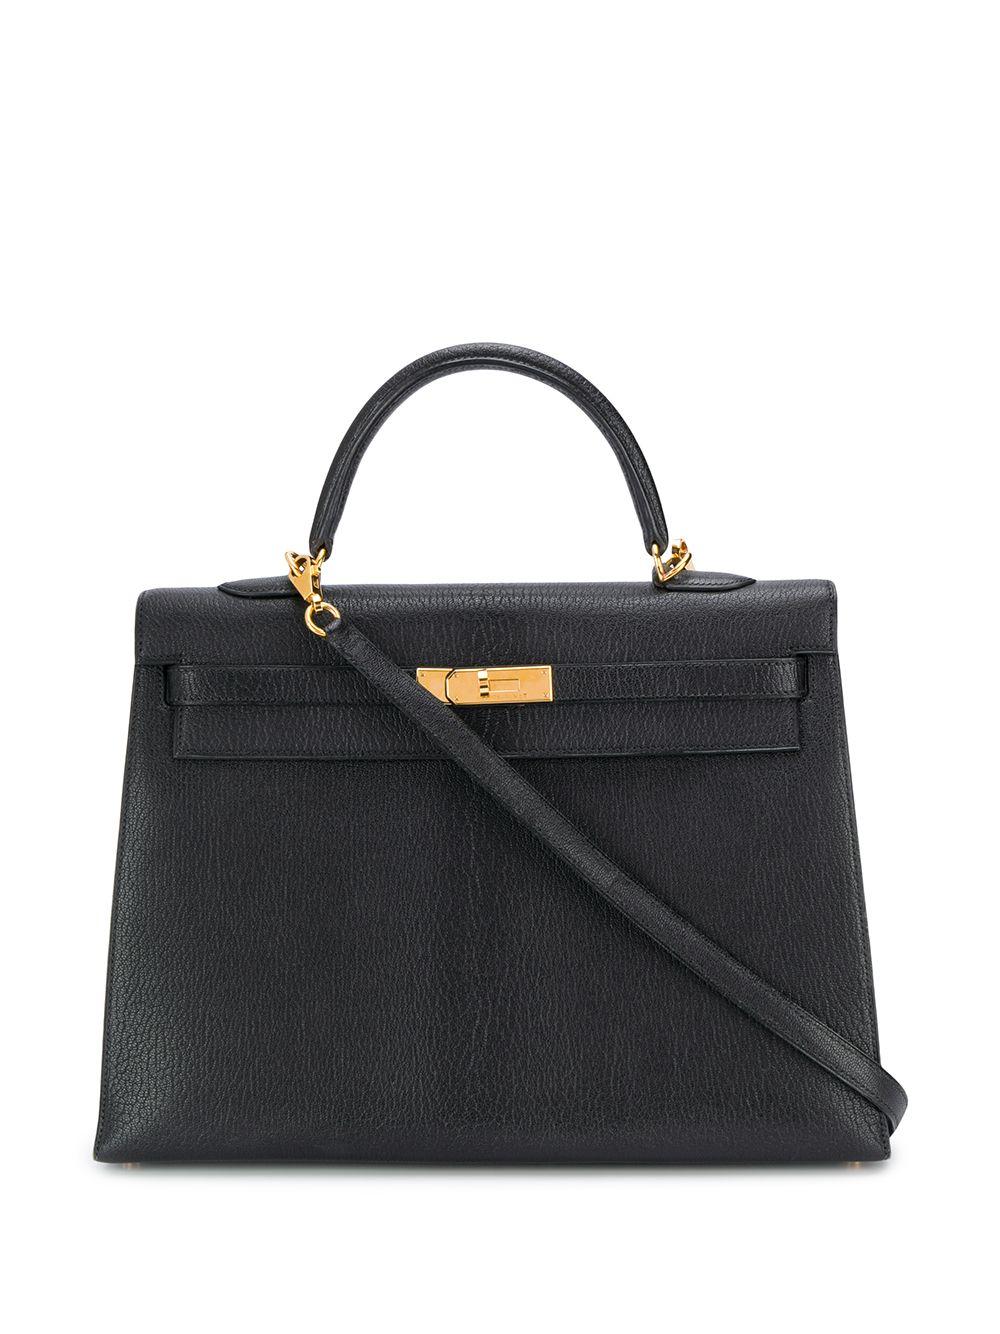 Crafted in France from pure black Chevre de Coromandel, a soft goat hide leather, popular for its lightweight and scratch-resistant texture, this pre-loved, 35cm Kelly Sellier bag features a medium, round top-handle, an adjustable crossbody shoulder